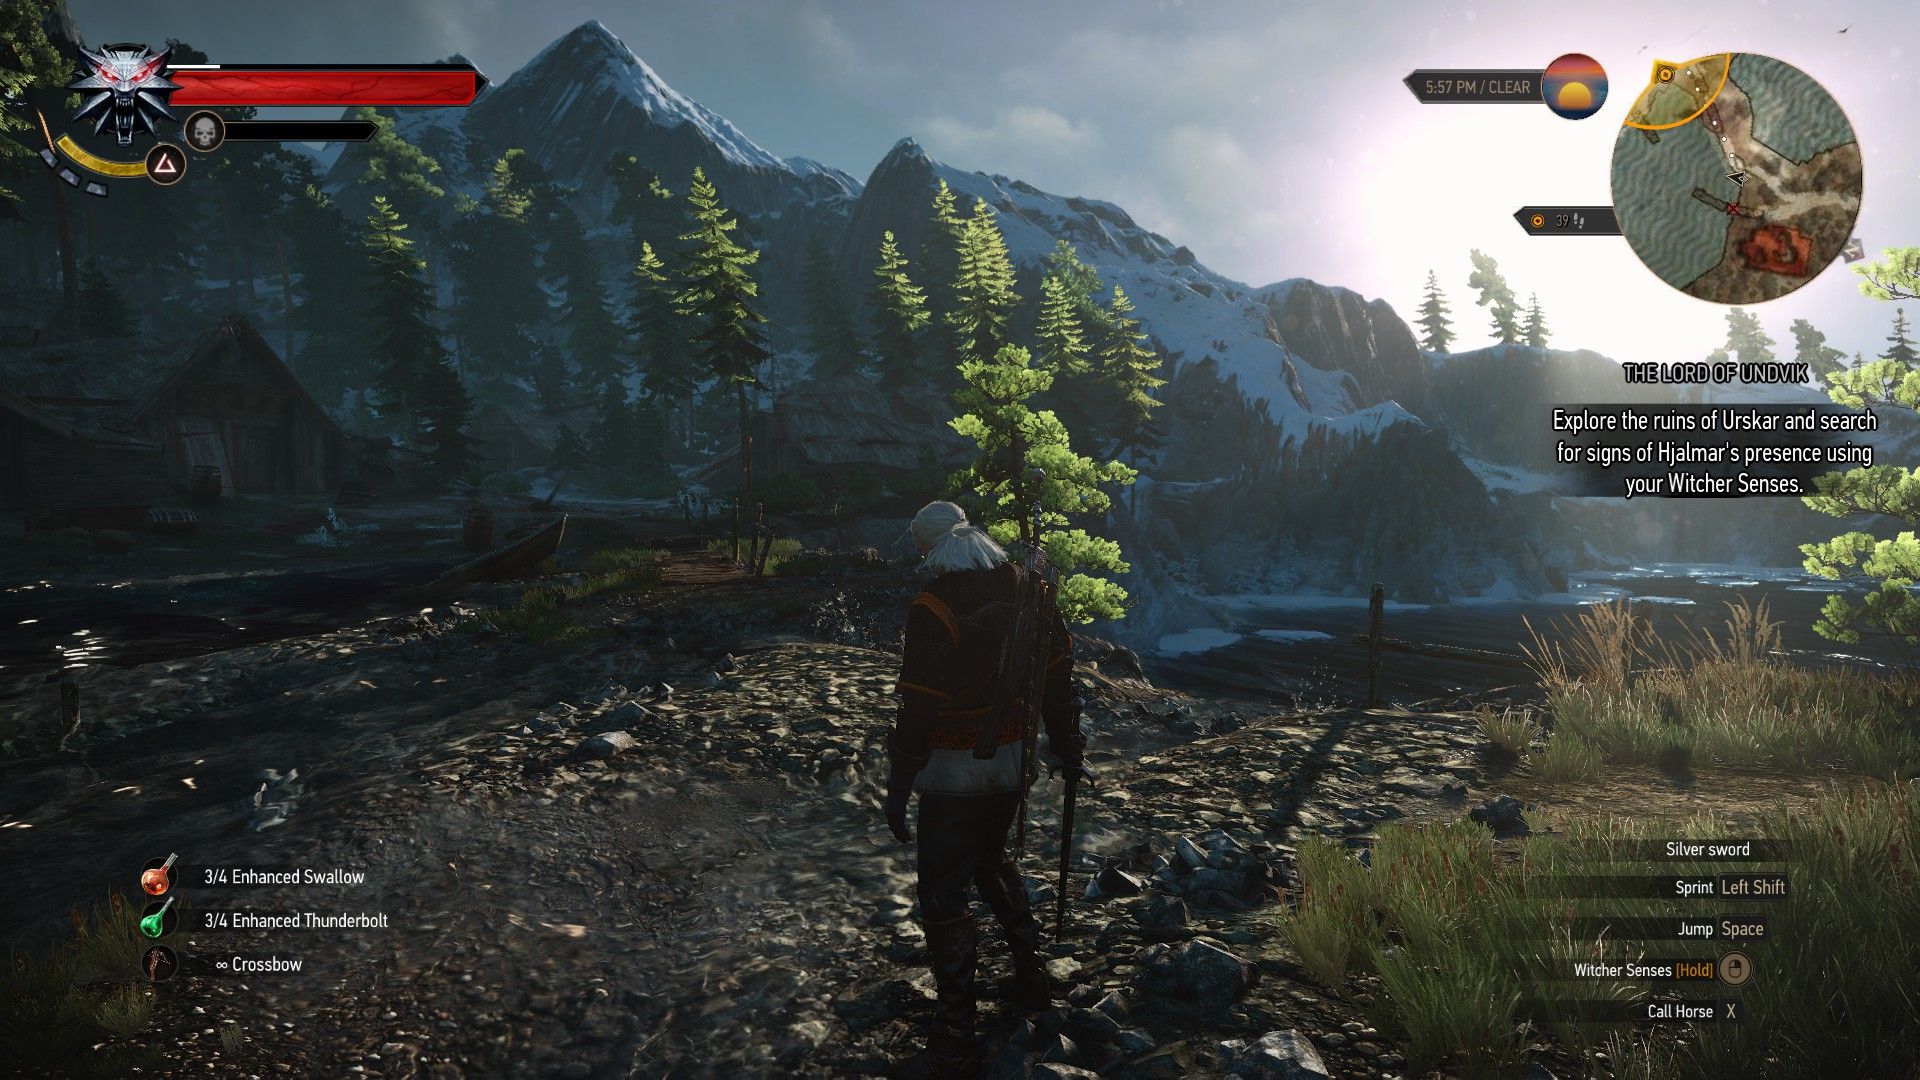 The Witcher 3 PC Screenshots - Image #17062 | New Game Network